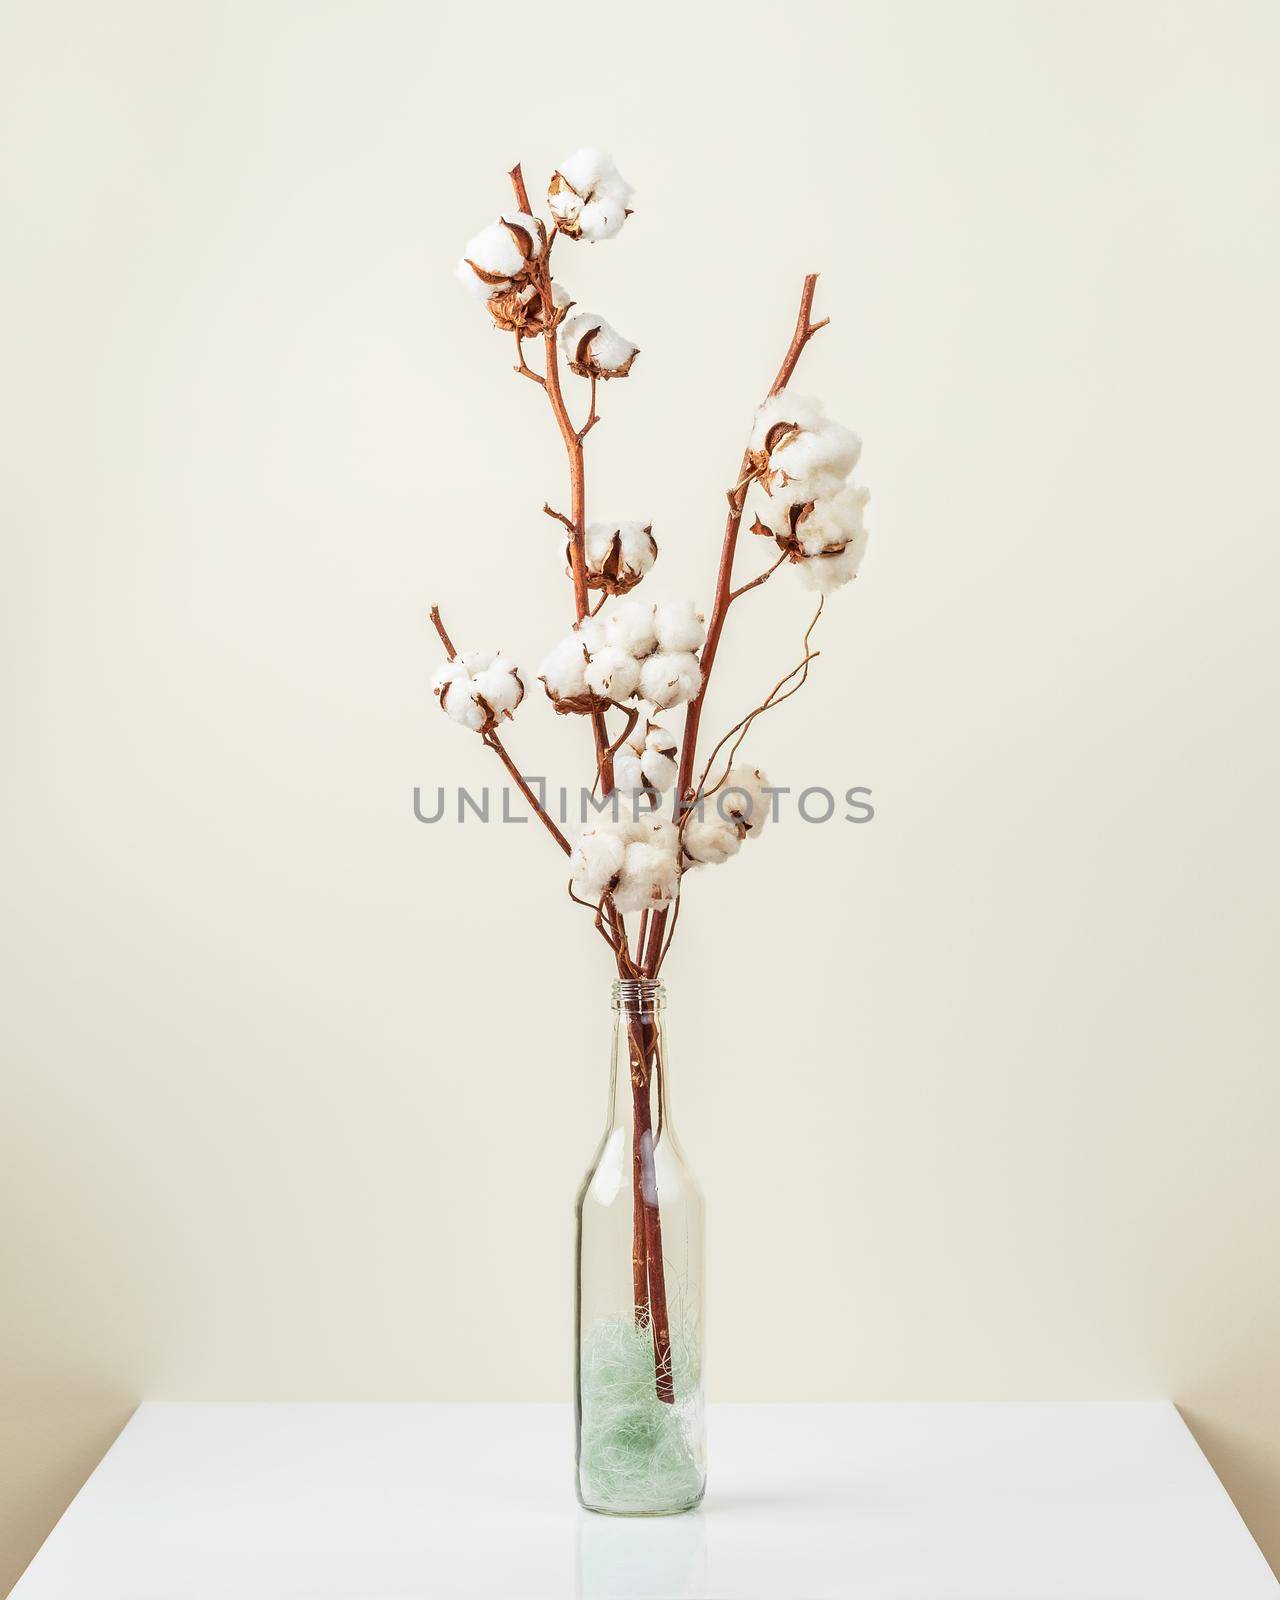 Cotton flower branch bouquet in glass bottle vase on the table over light beige background